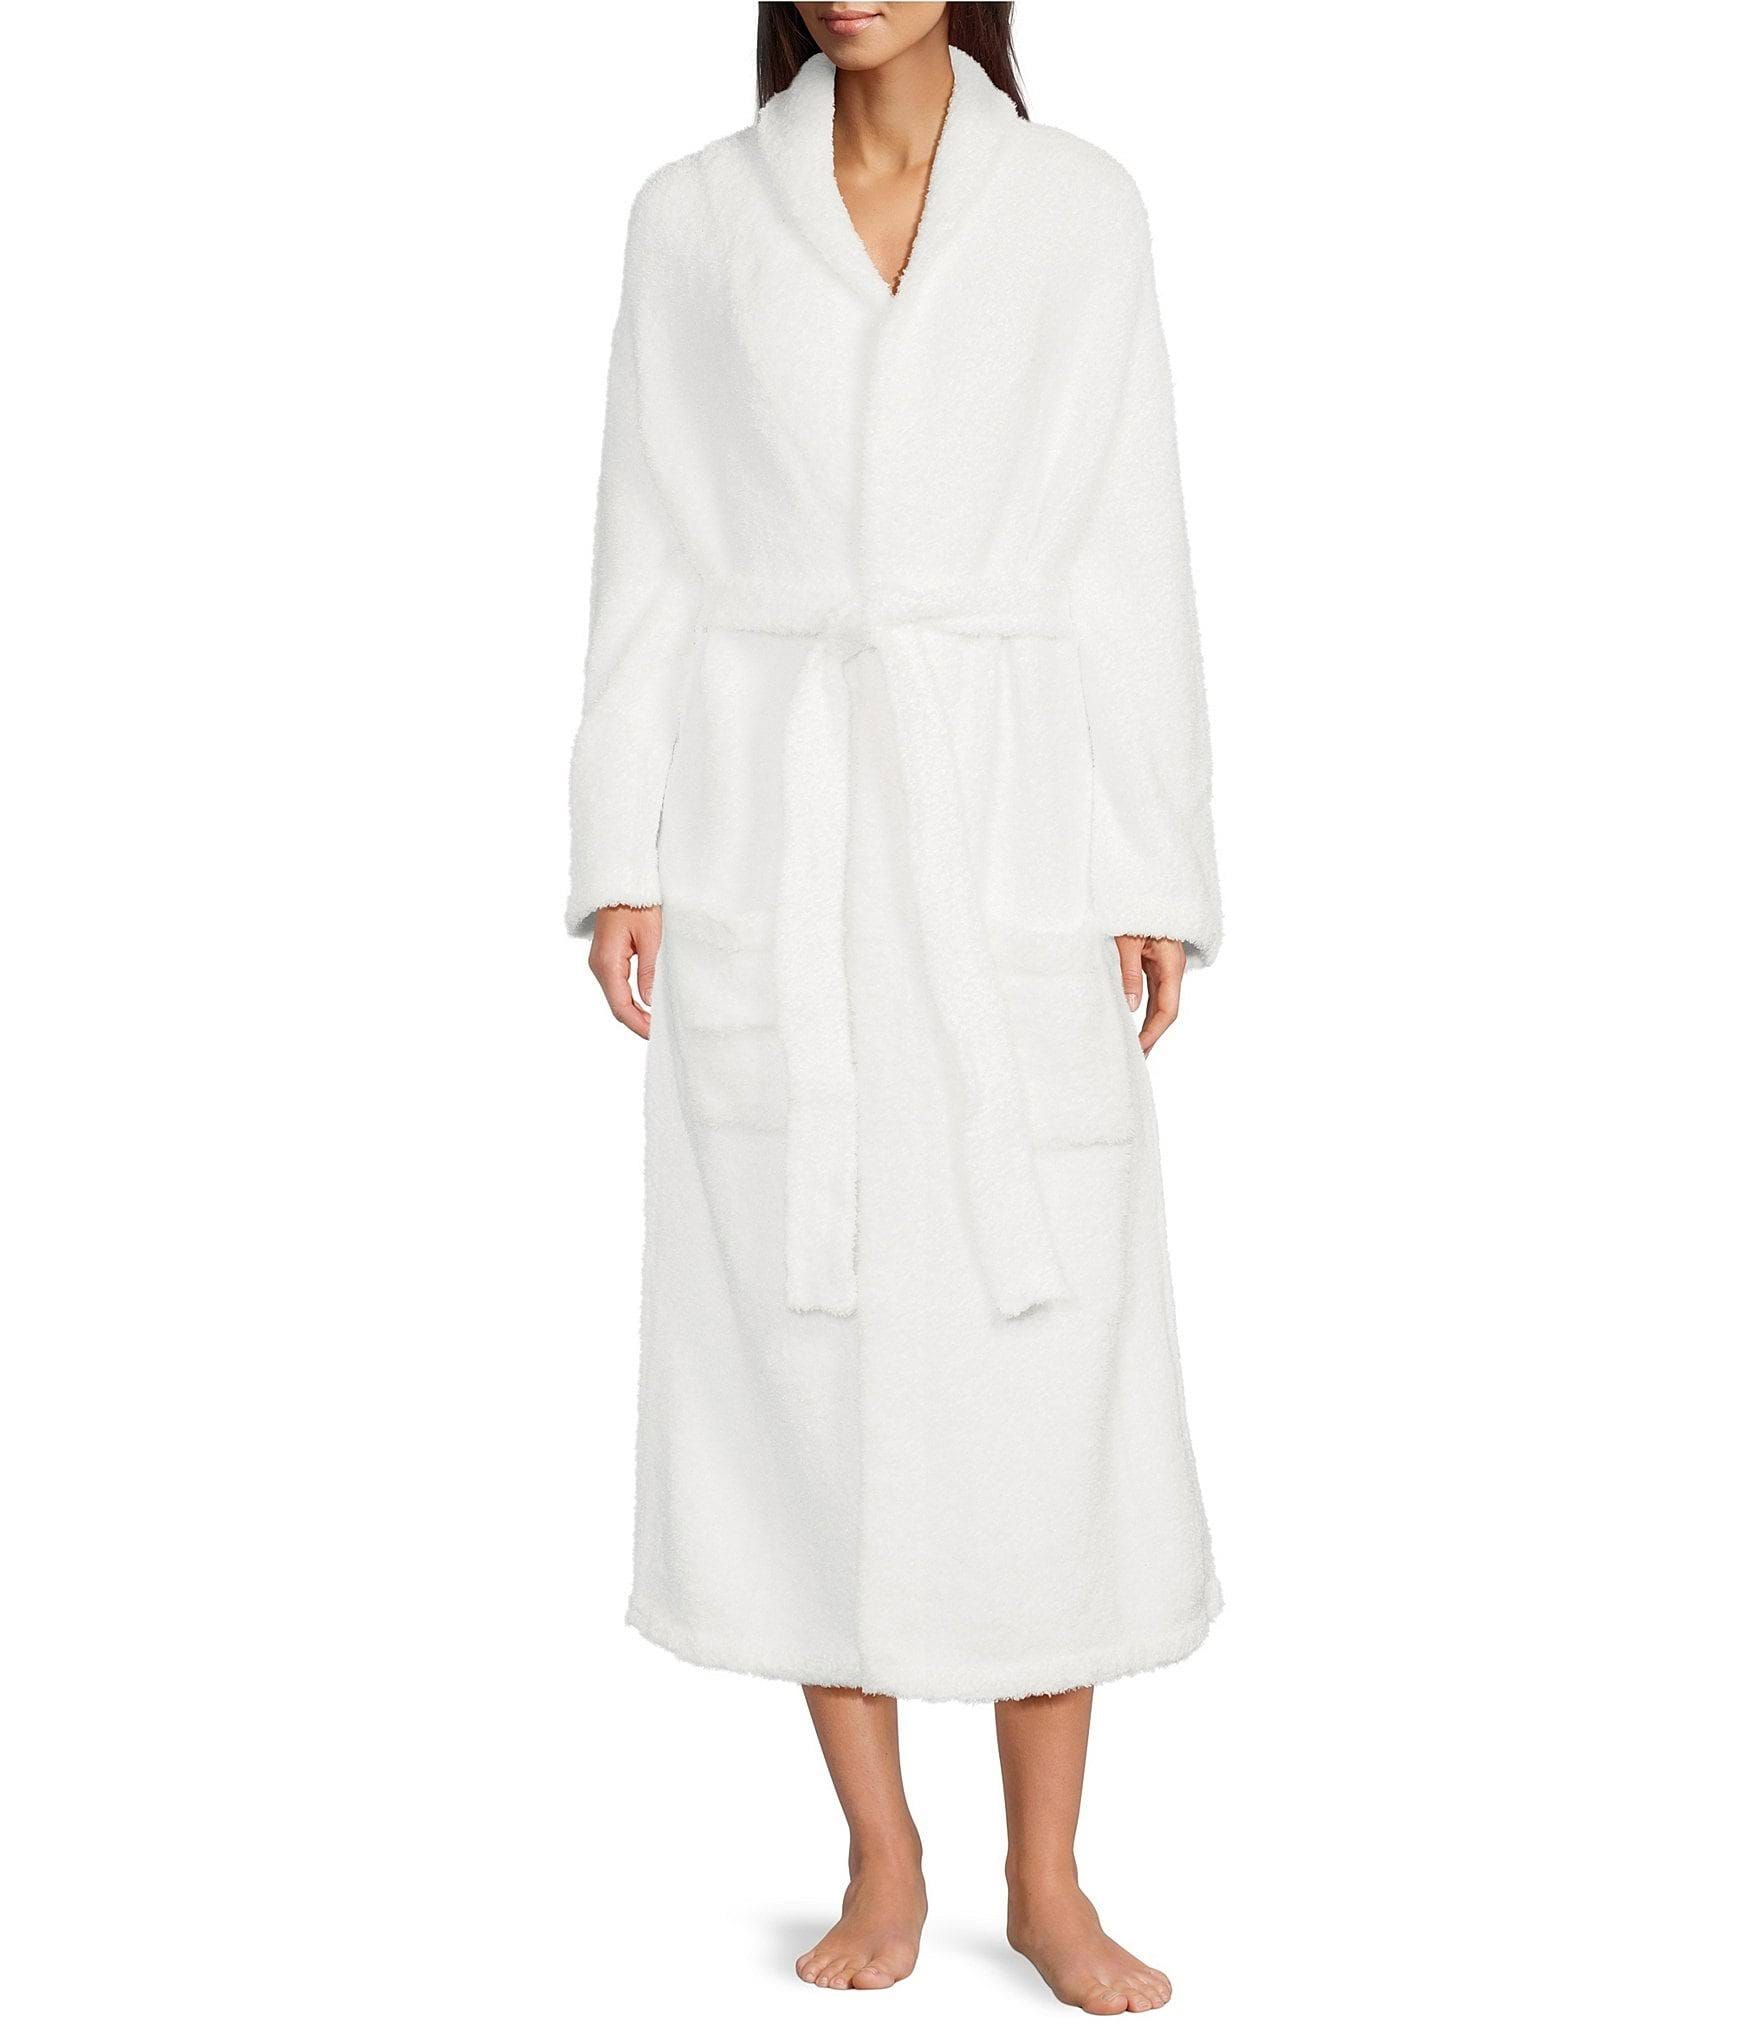 Soft and Comfortable White Long Robe by Barefoot Dreams | Image